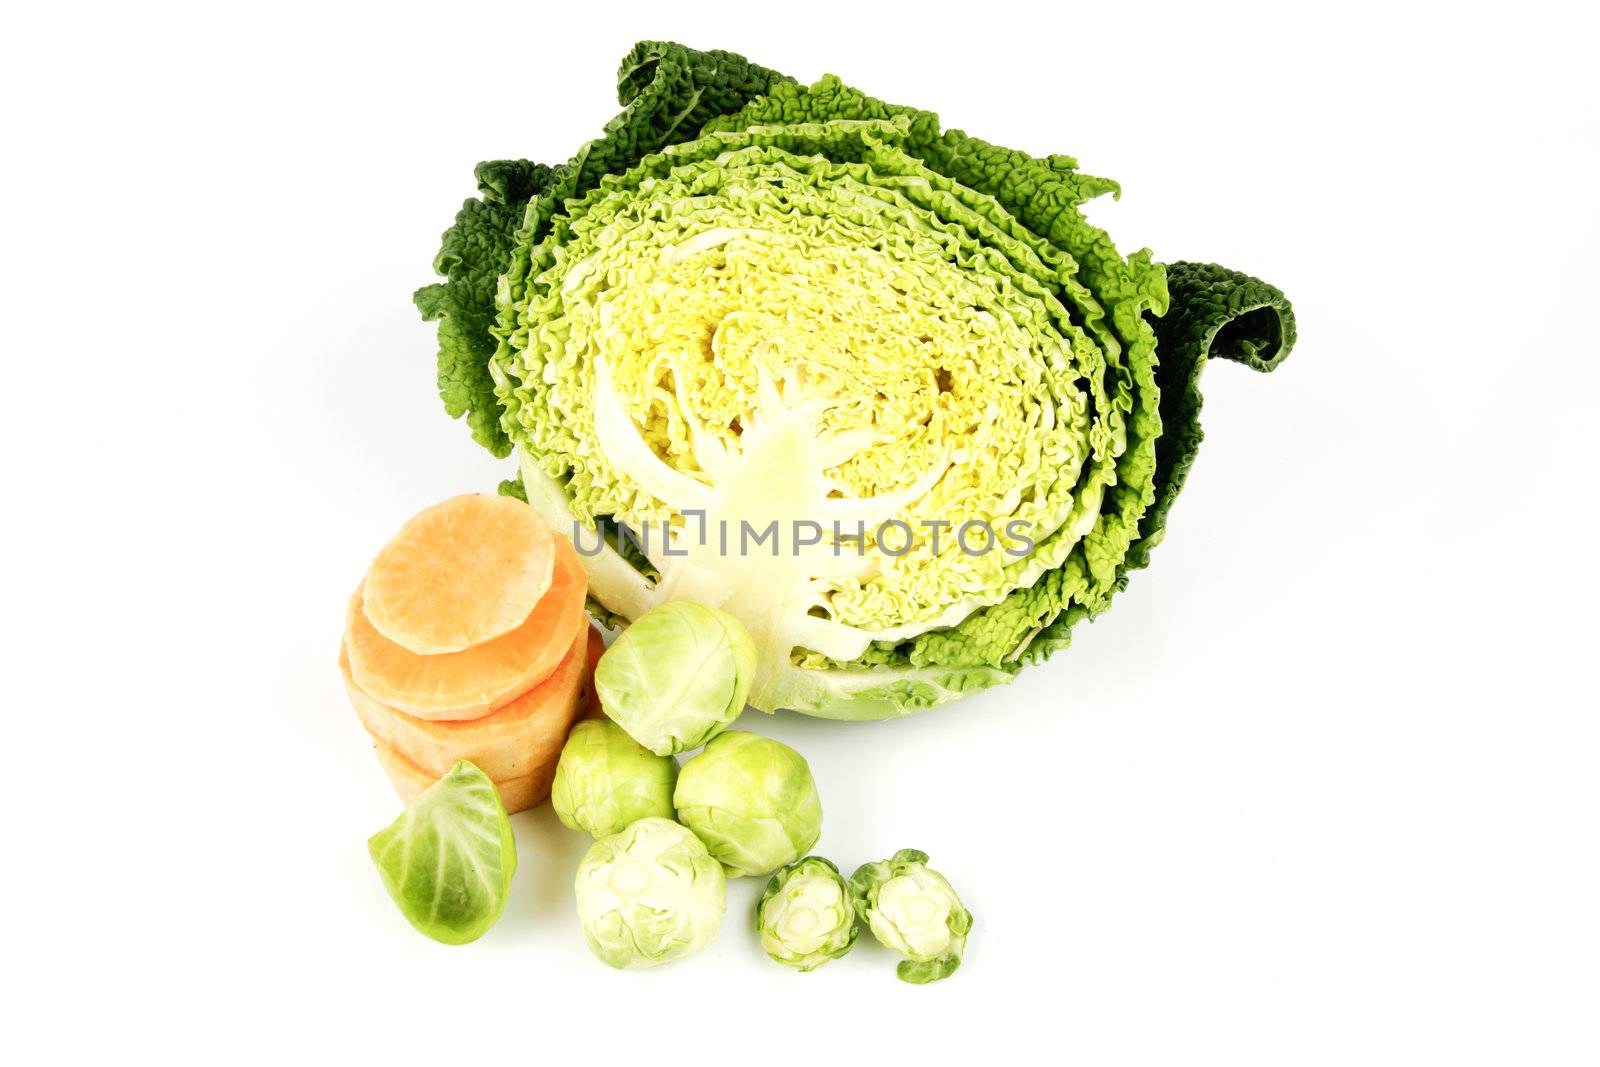 Half a raw green cabbage with slices of raw sweet potato and peeled green sprouts on a reflective white background